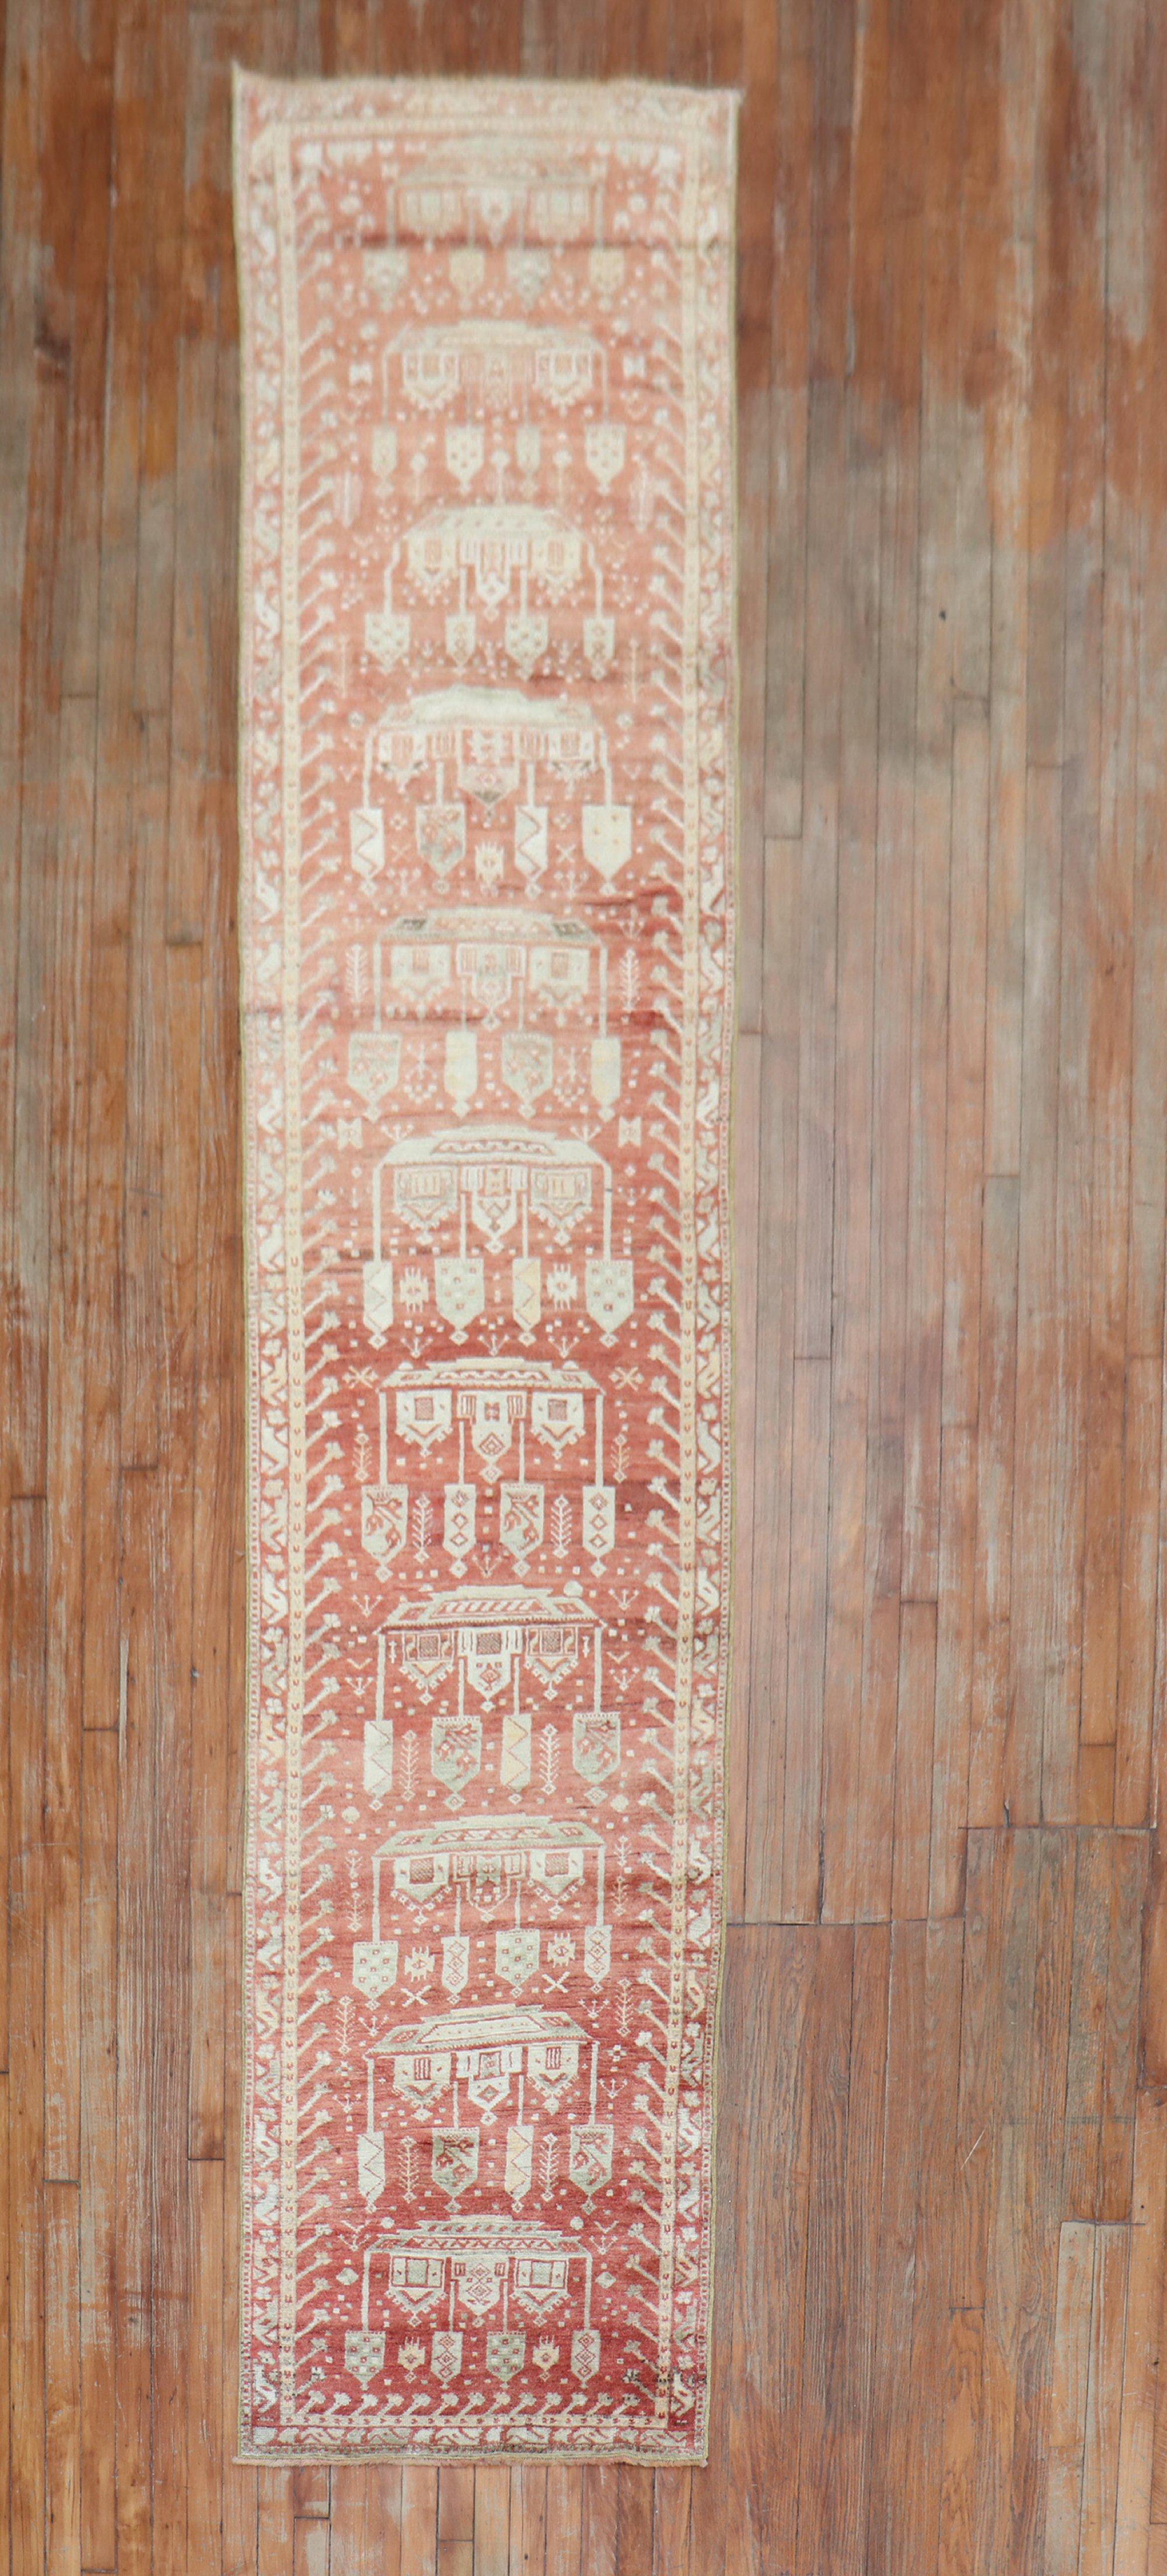 An early 20th-century fine Turkish Sivas runner in predominantly red

Measures: 2'7'' x 12'9''